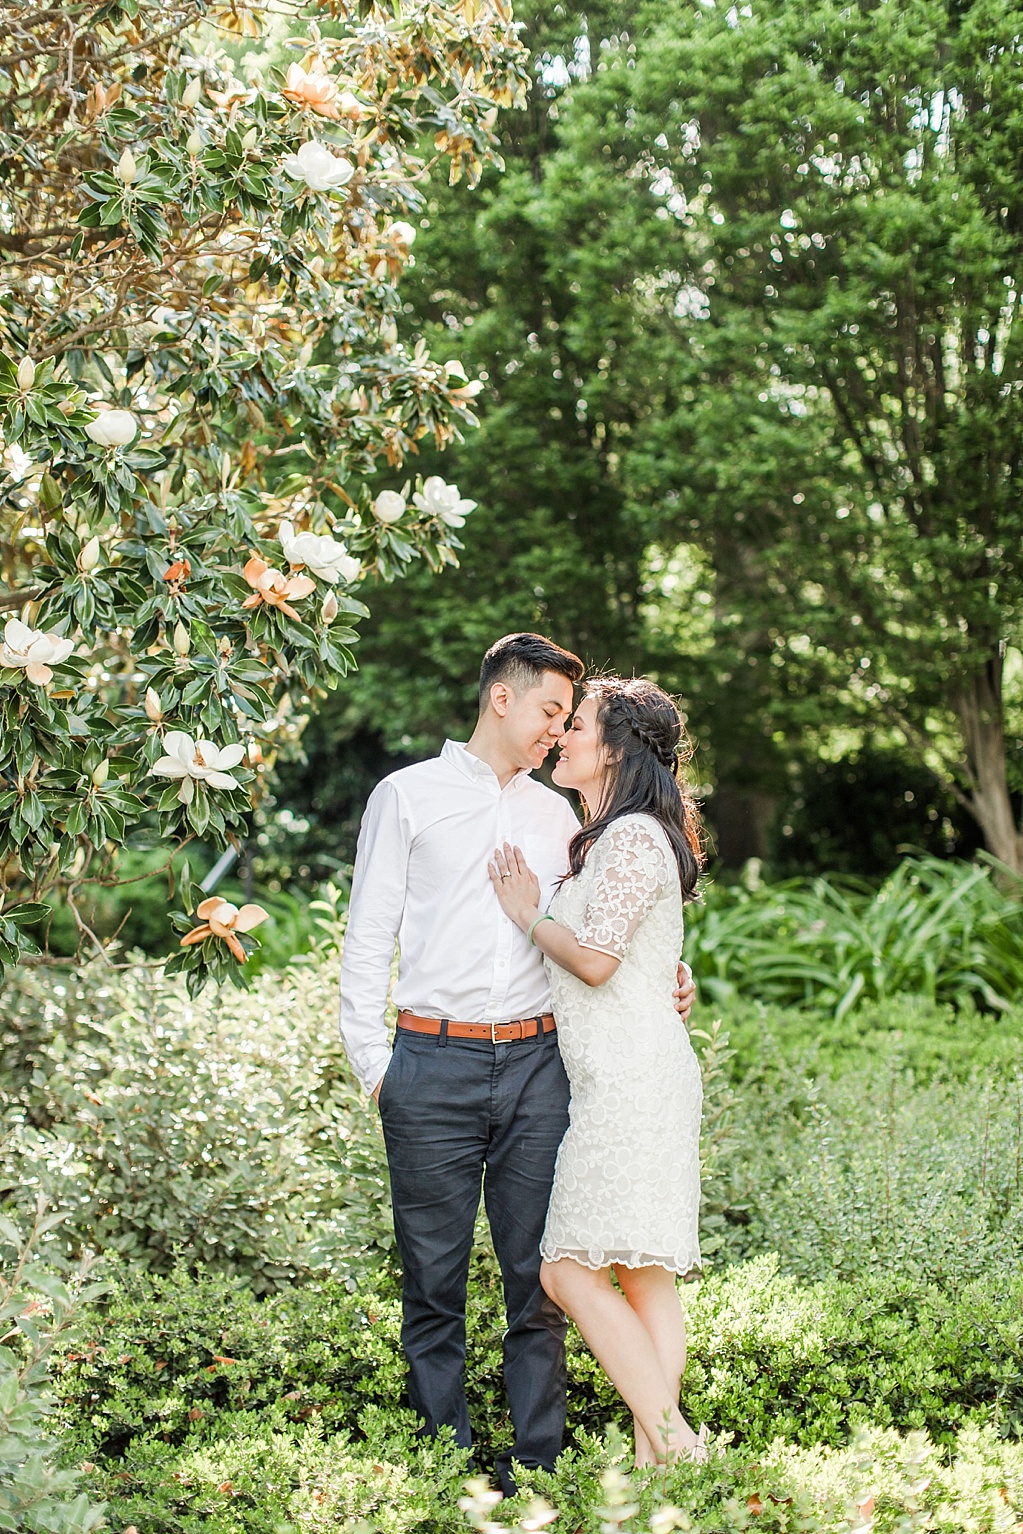 An Elegant Spring Engagement Session at the Dallas Arboretum and Botanical Gardens by Allison Jeffers Wedding Photography 0044